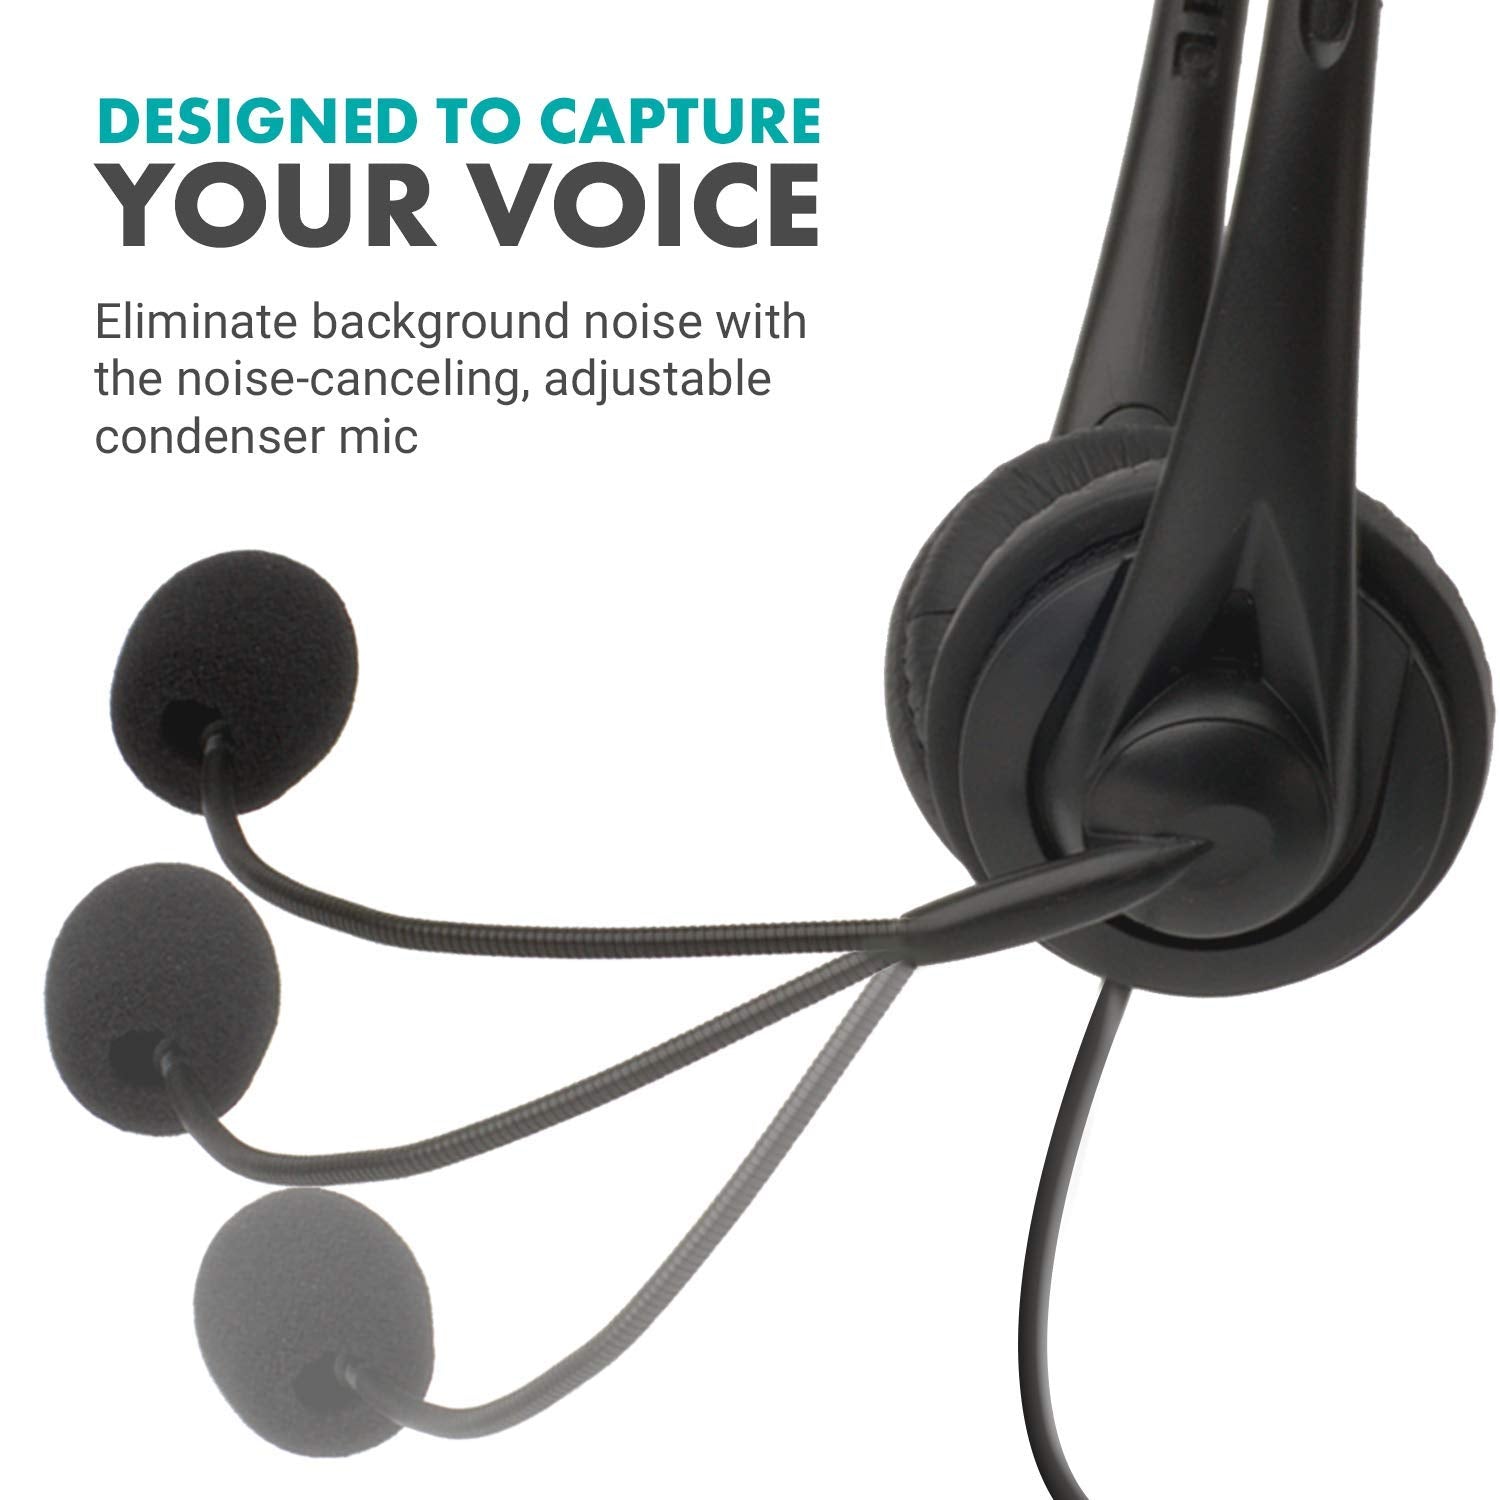 Movo HSM-1 USB Headset with Microphone - Universally Compatible with Laptop/Desktop, PC and Mac, Perfect for Podcasting, Gaming, Remote Work, Conferences, Online Education, with Volume/Mute Controls  - Like New